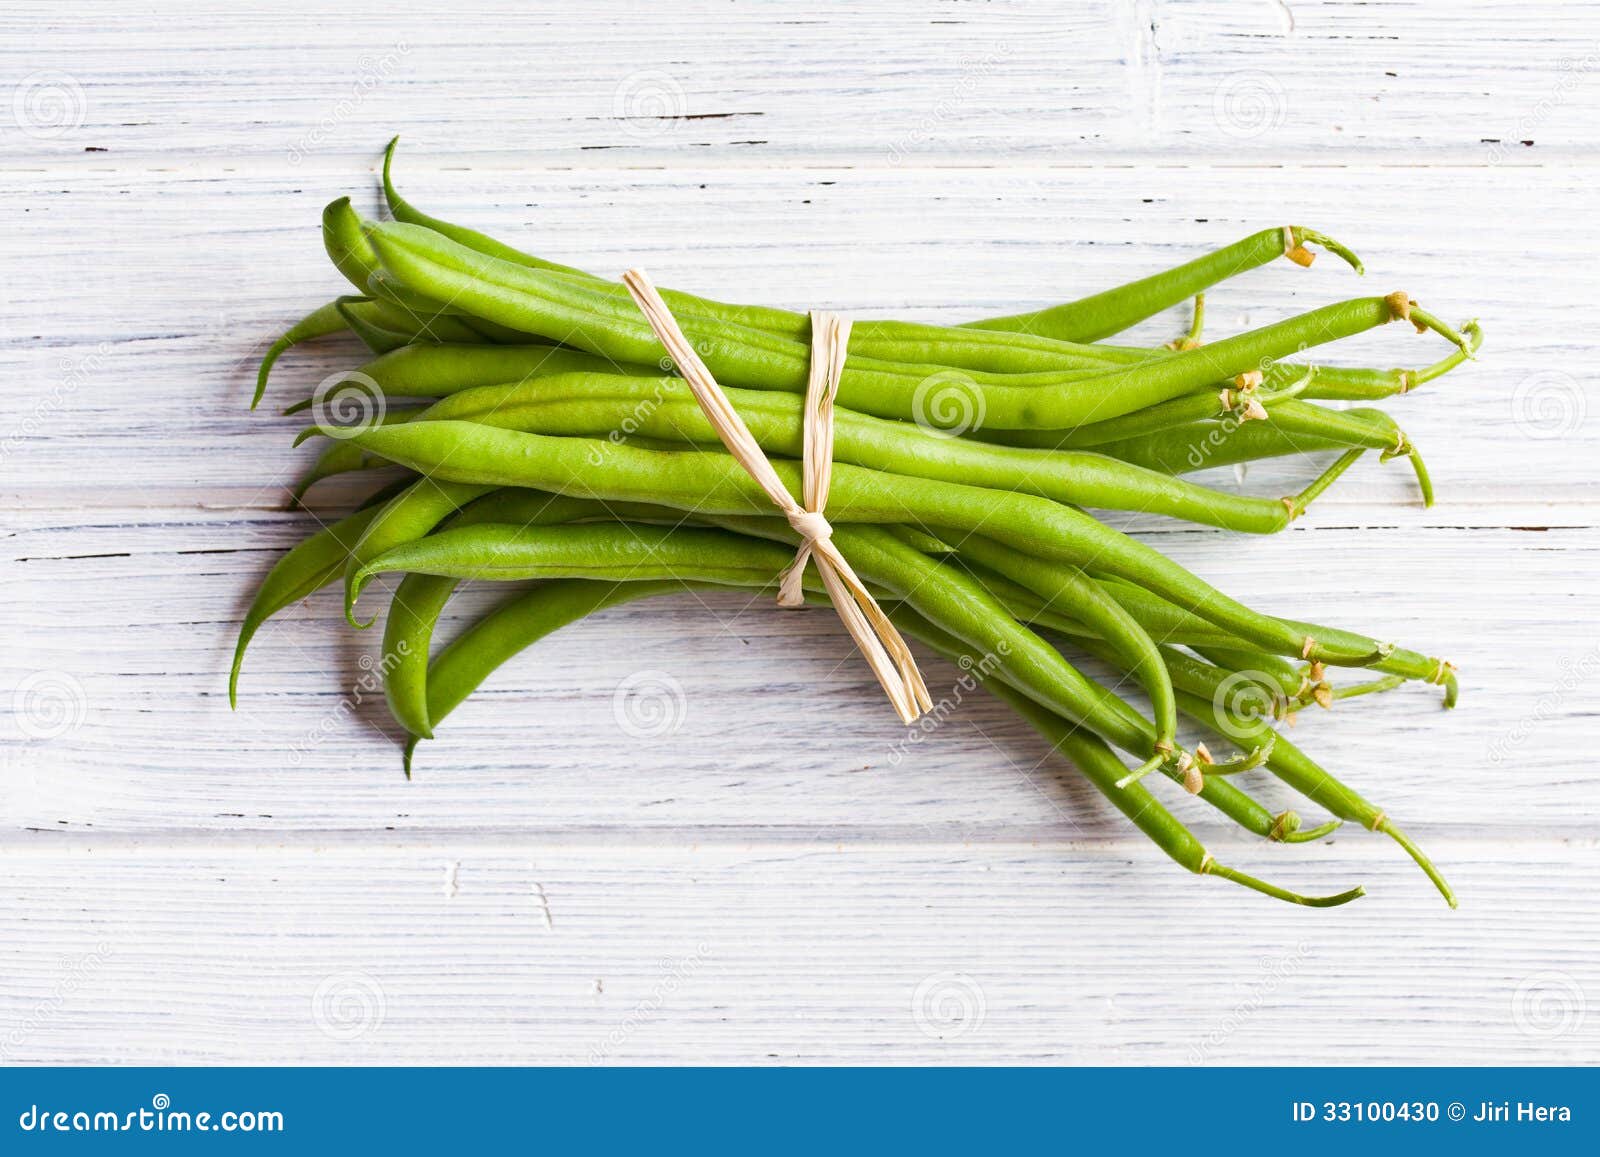 Green Beans on Kitchen Table Stock Photo - Image of veggie, ingredients ...